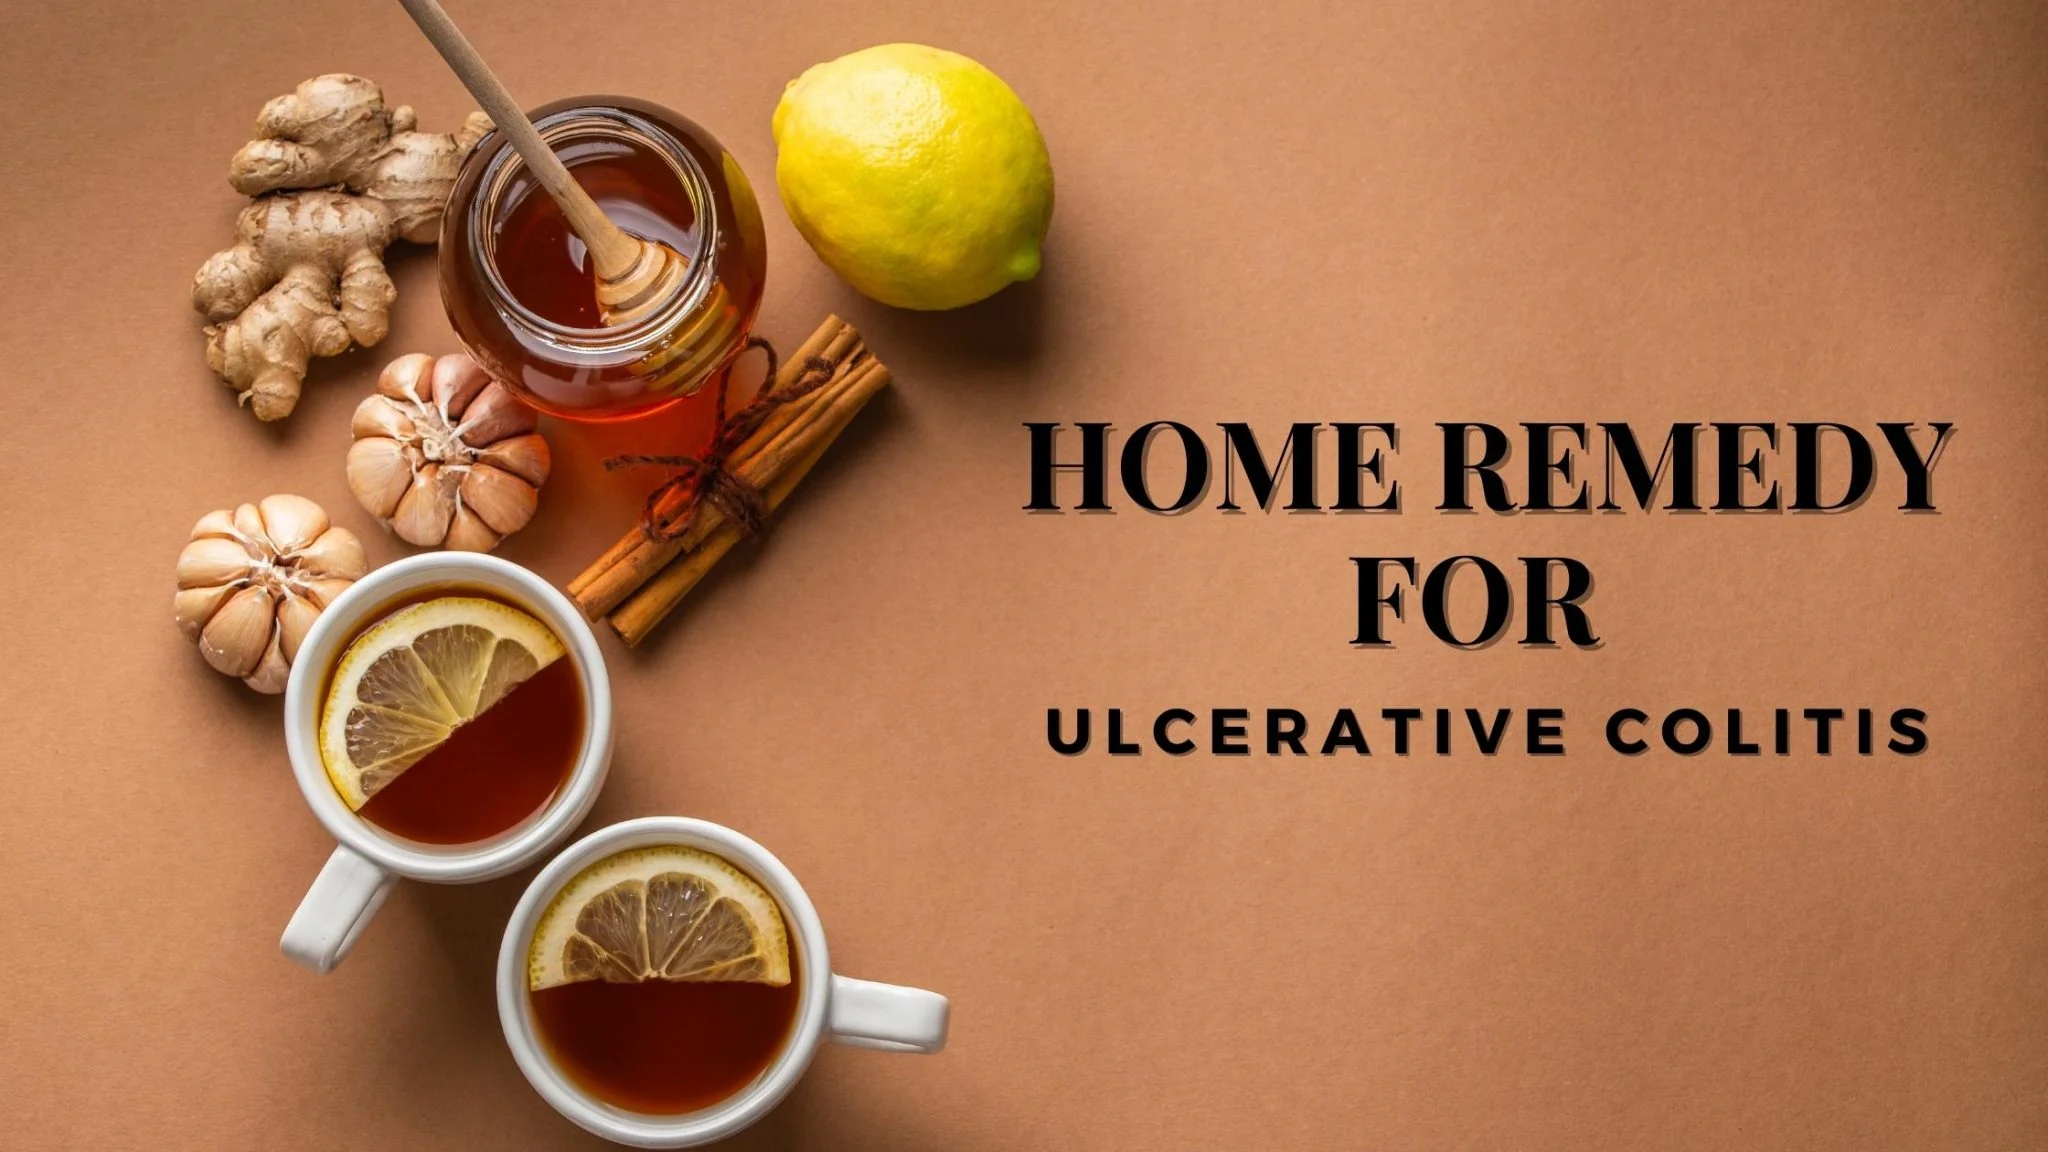 Home Remedies for Ulcerative Colitis